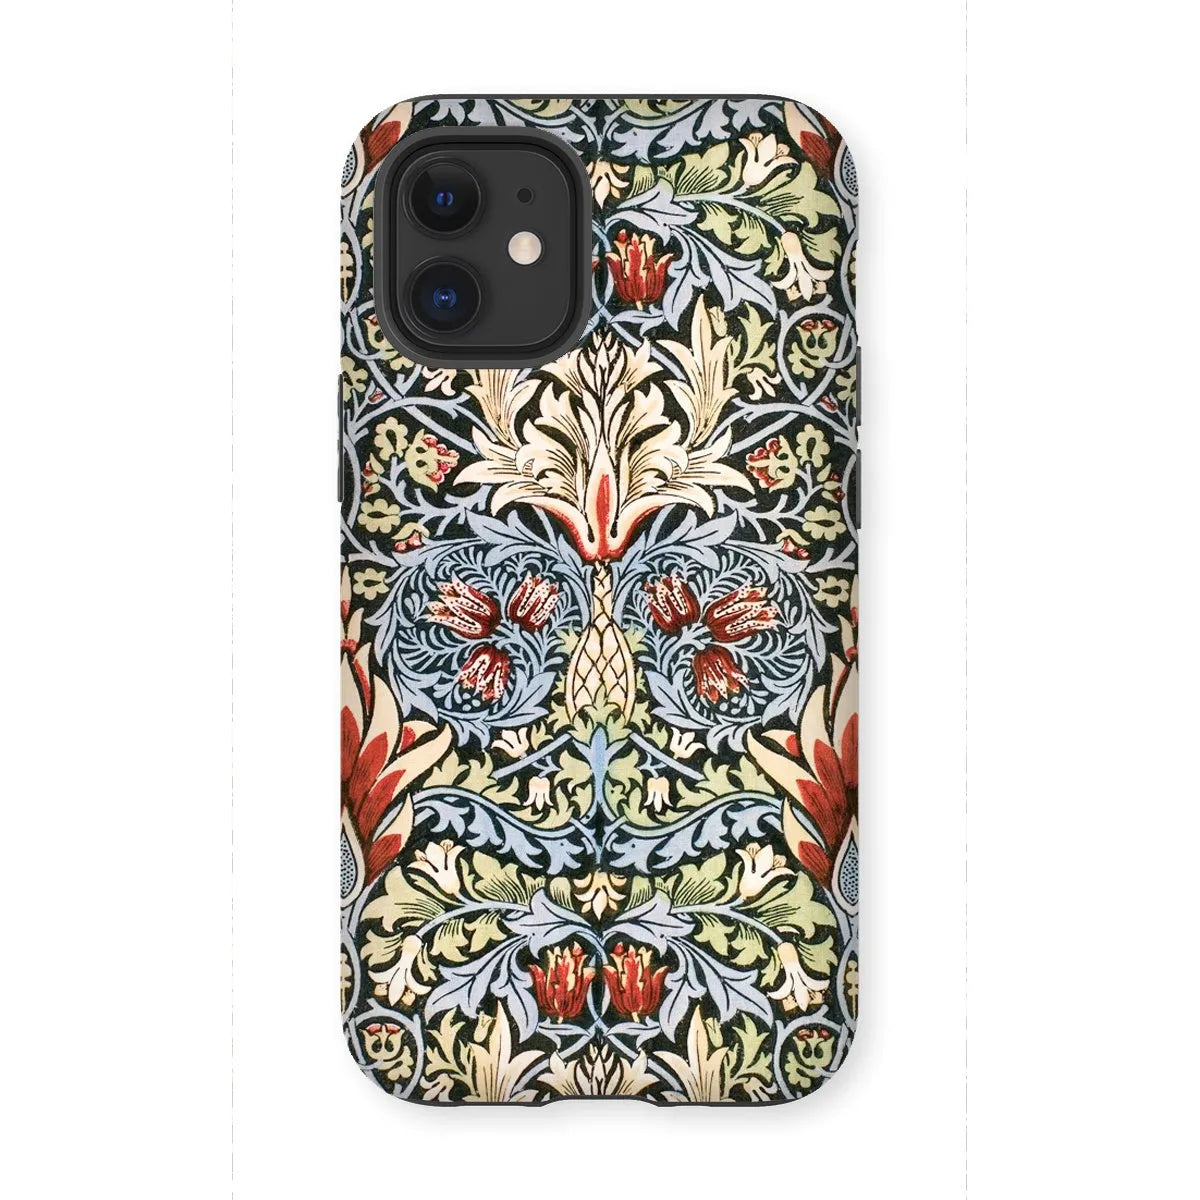 Snakeshead - Arts And Crafts Pattern Phone Case - William Morris - Iphone 12 Mini / Matte - Mobile Phone Cases